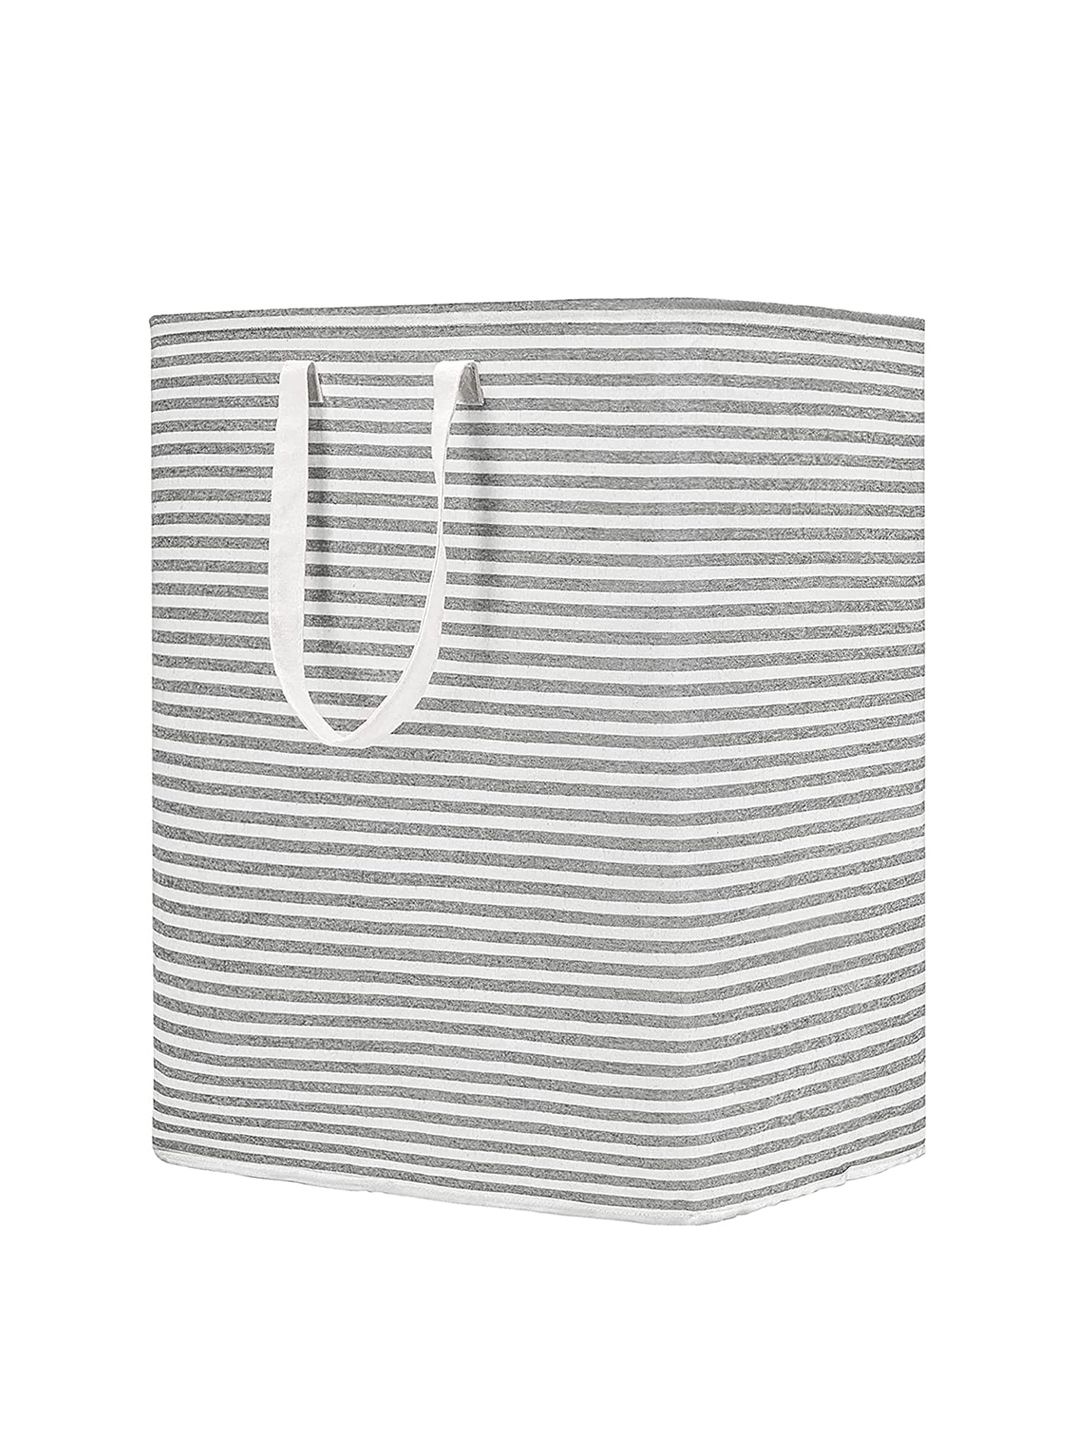 HOUSE OF QUIRK Grey & White Striped Collapsible Large Freestanding Laundry Storage Basket Price in India